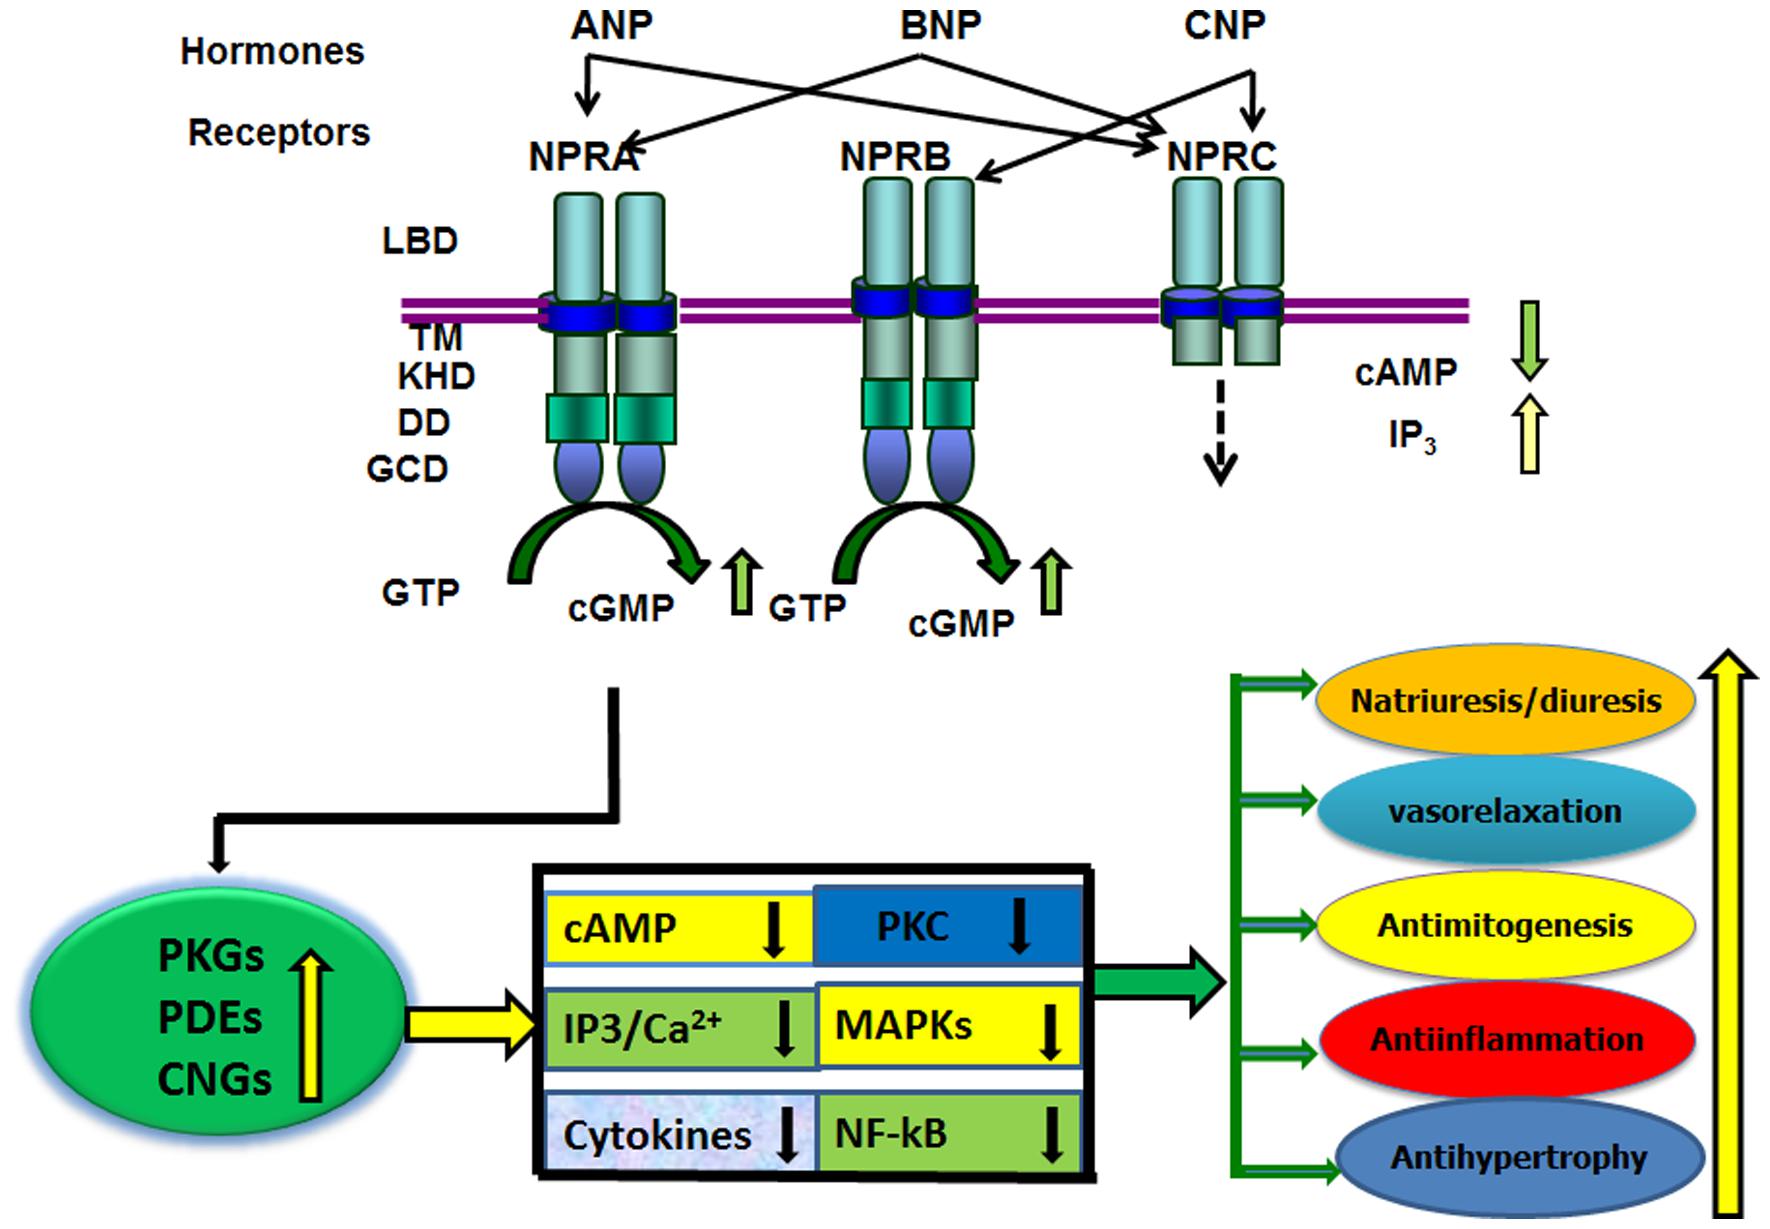 Frontiers Guanylyl Cyclase Natriuretic Peptide Receptor A Signaling Antagonizes Phosphoinositide Hydrolysis Ca2 Release And Activation Of Protein Kinase C Molecular Neuroscience